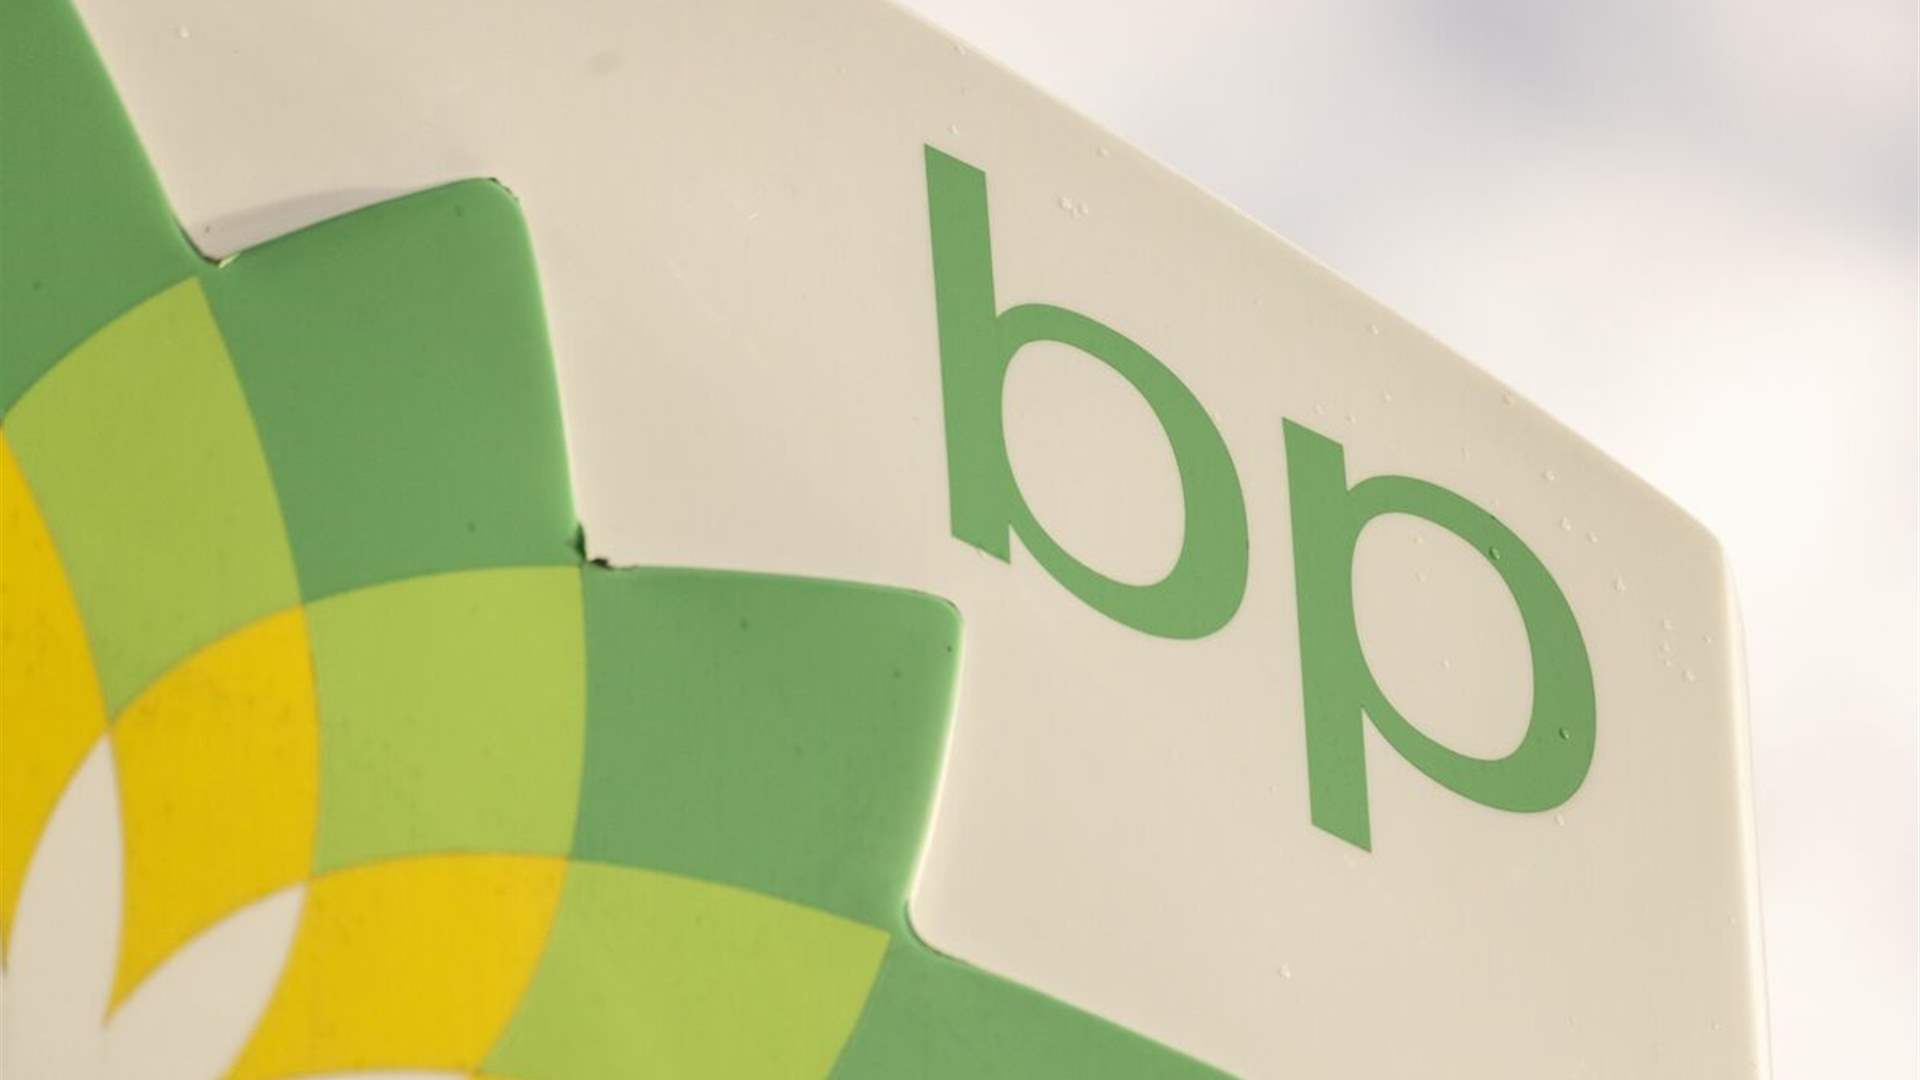 BP intends to invest $1.5 billion in Egypt, Bloomberg News says